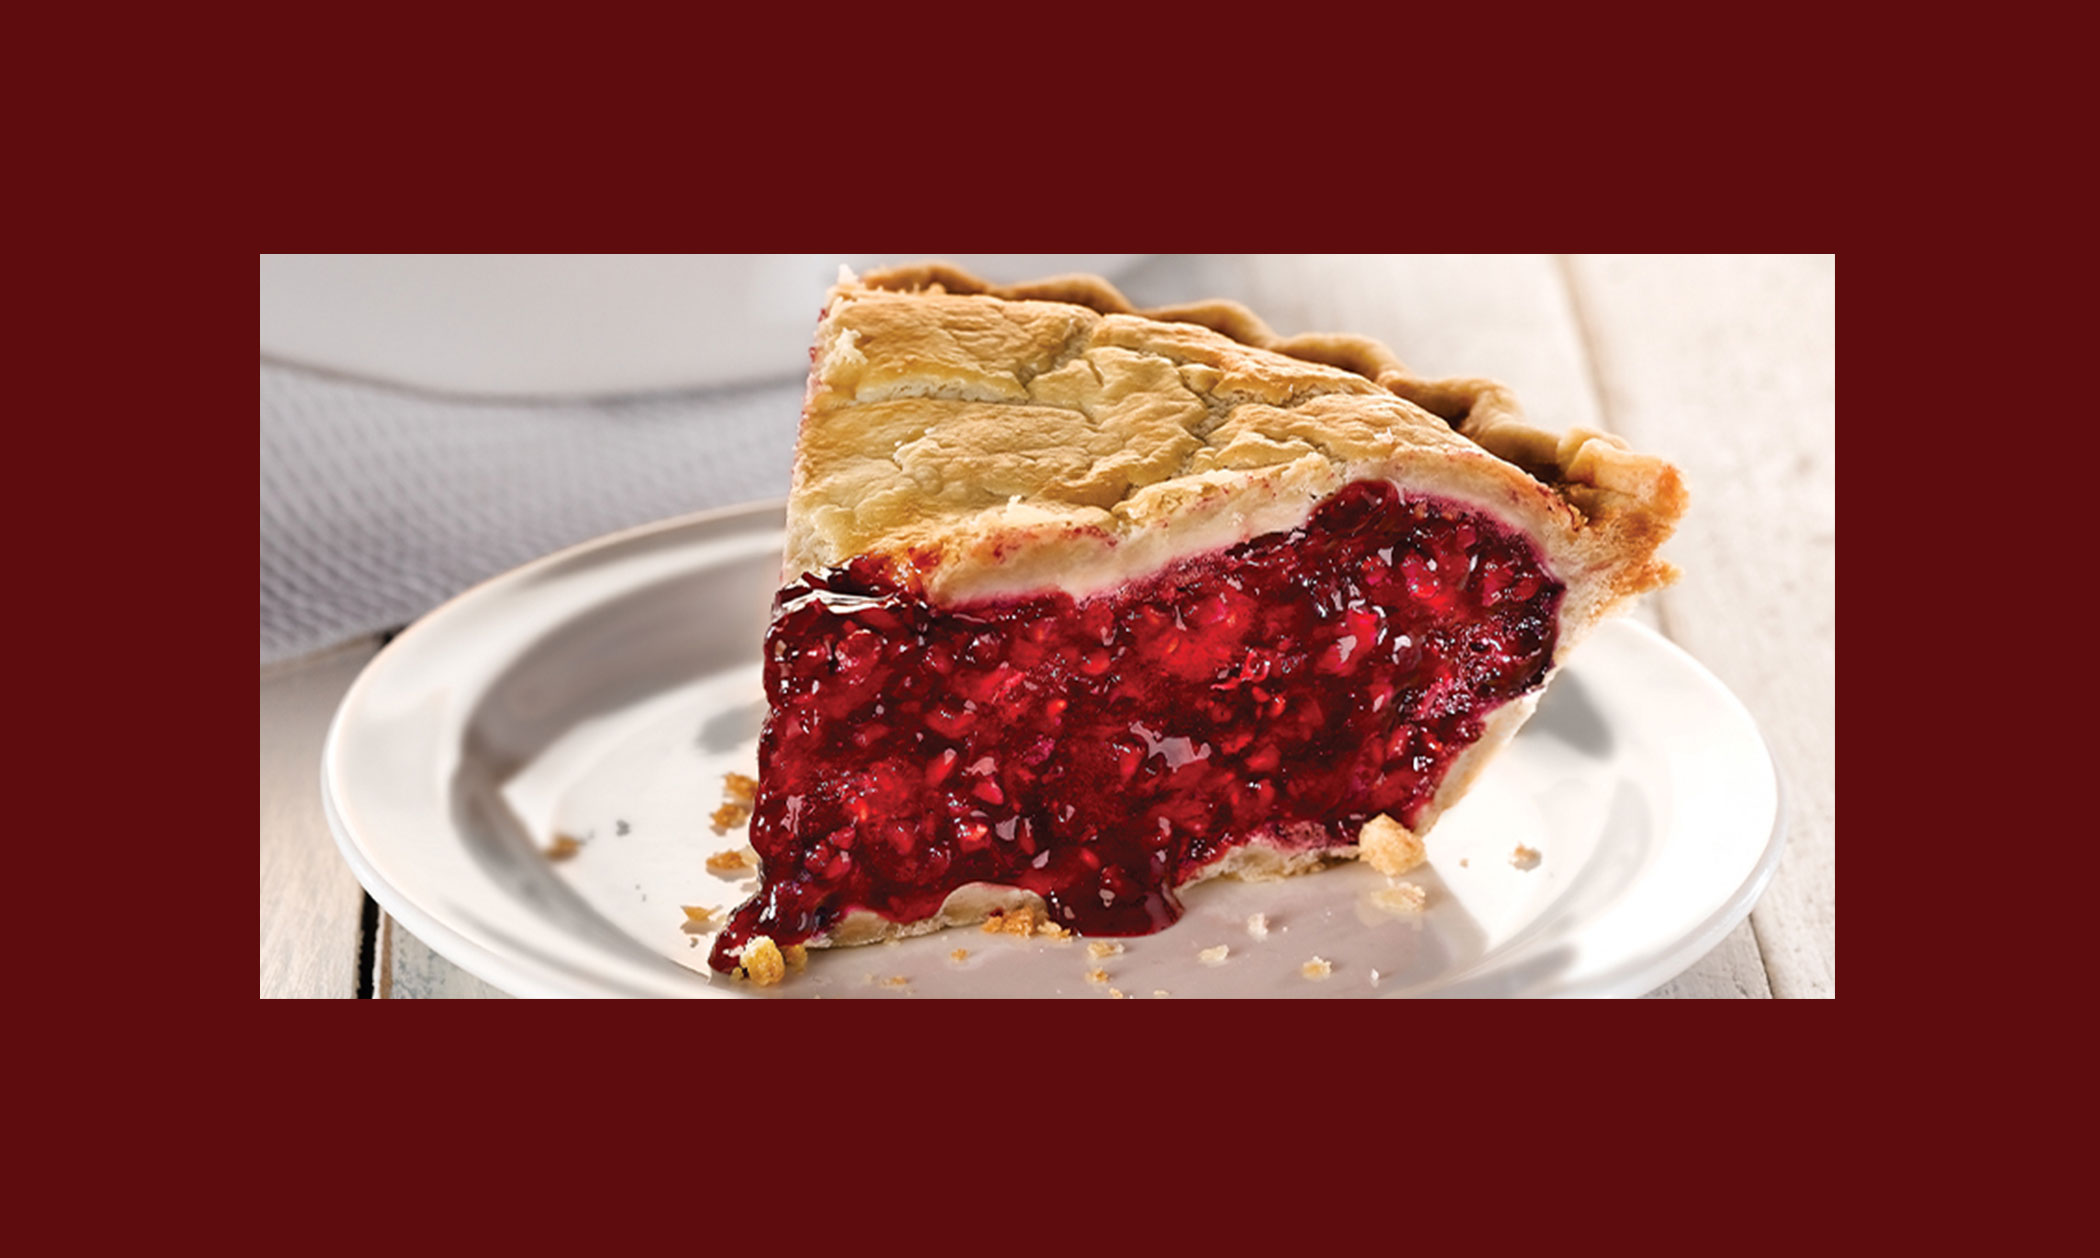 Claim Your FREE Slice of Pie at Perkins! The Savvy Sampler